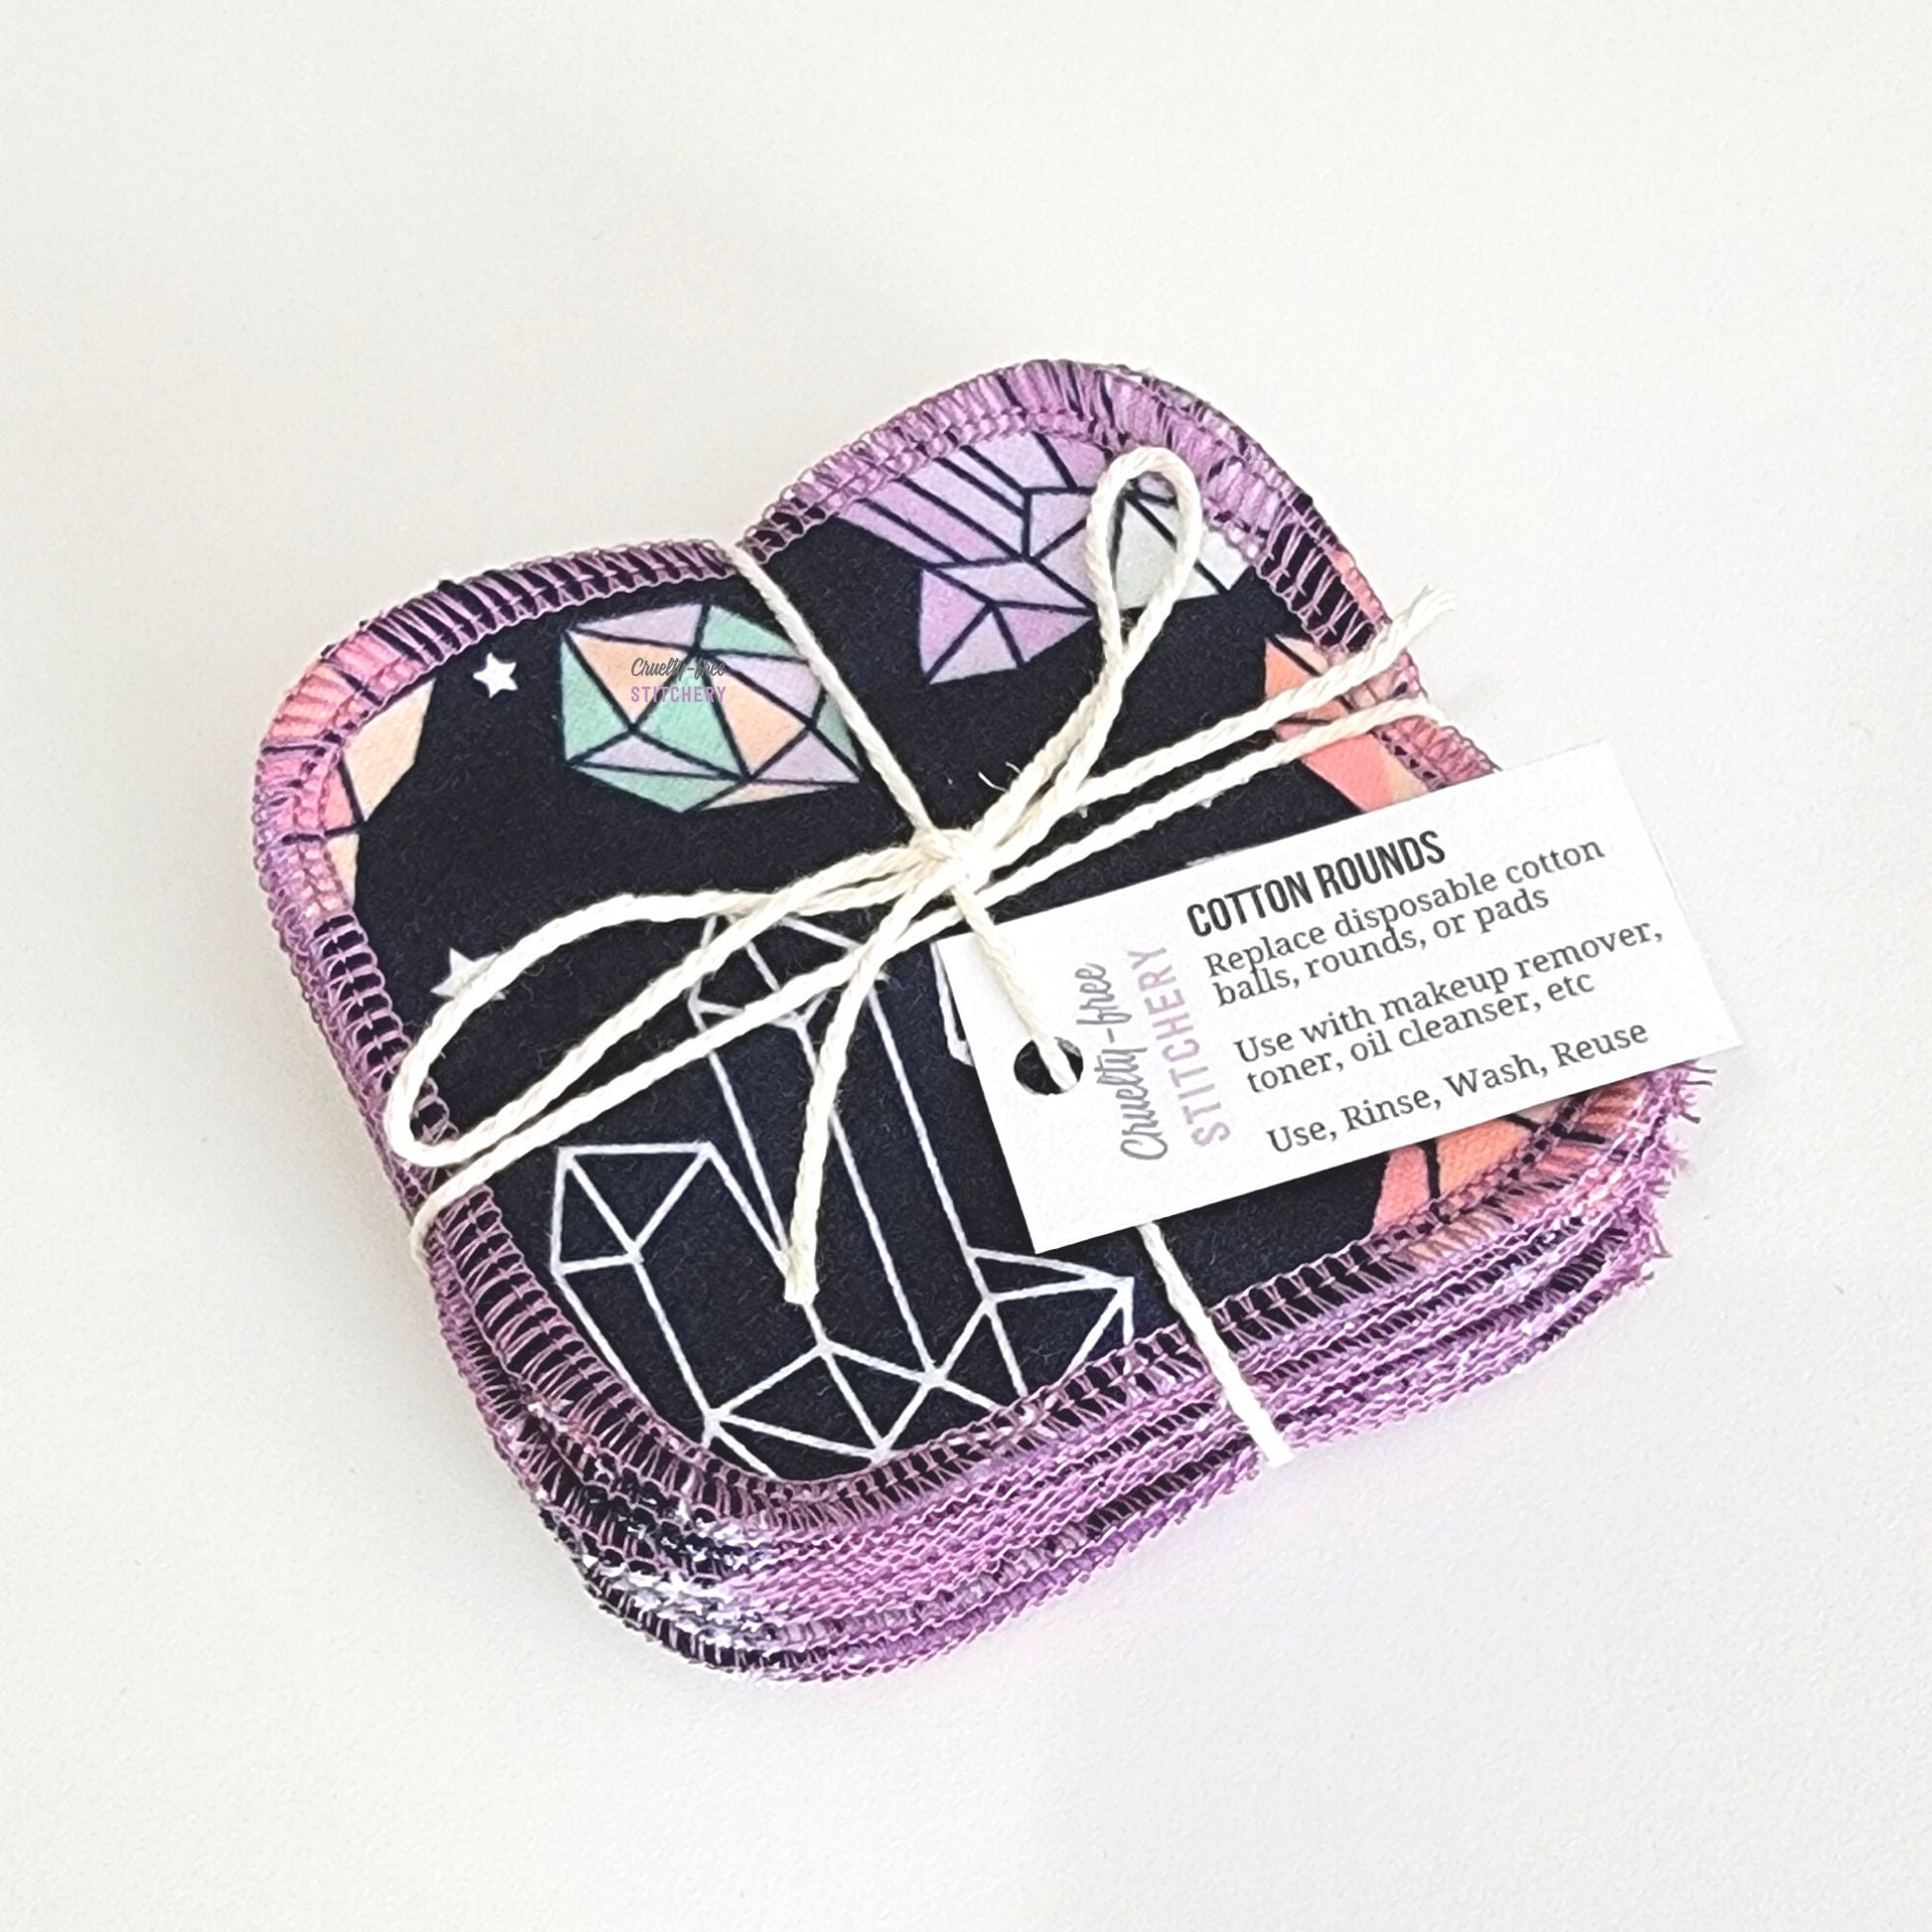 A bundled pack of crystals print reusable cotton rounds, tied with a cotton string and a small paper tag.